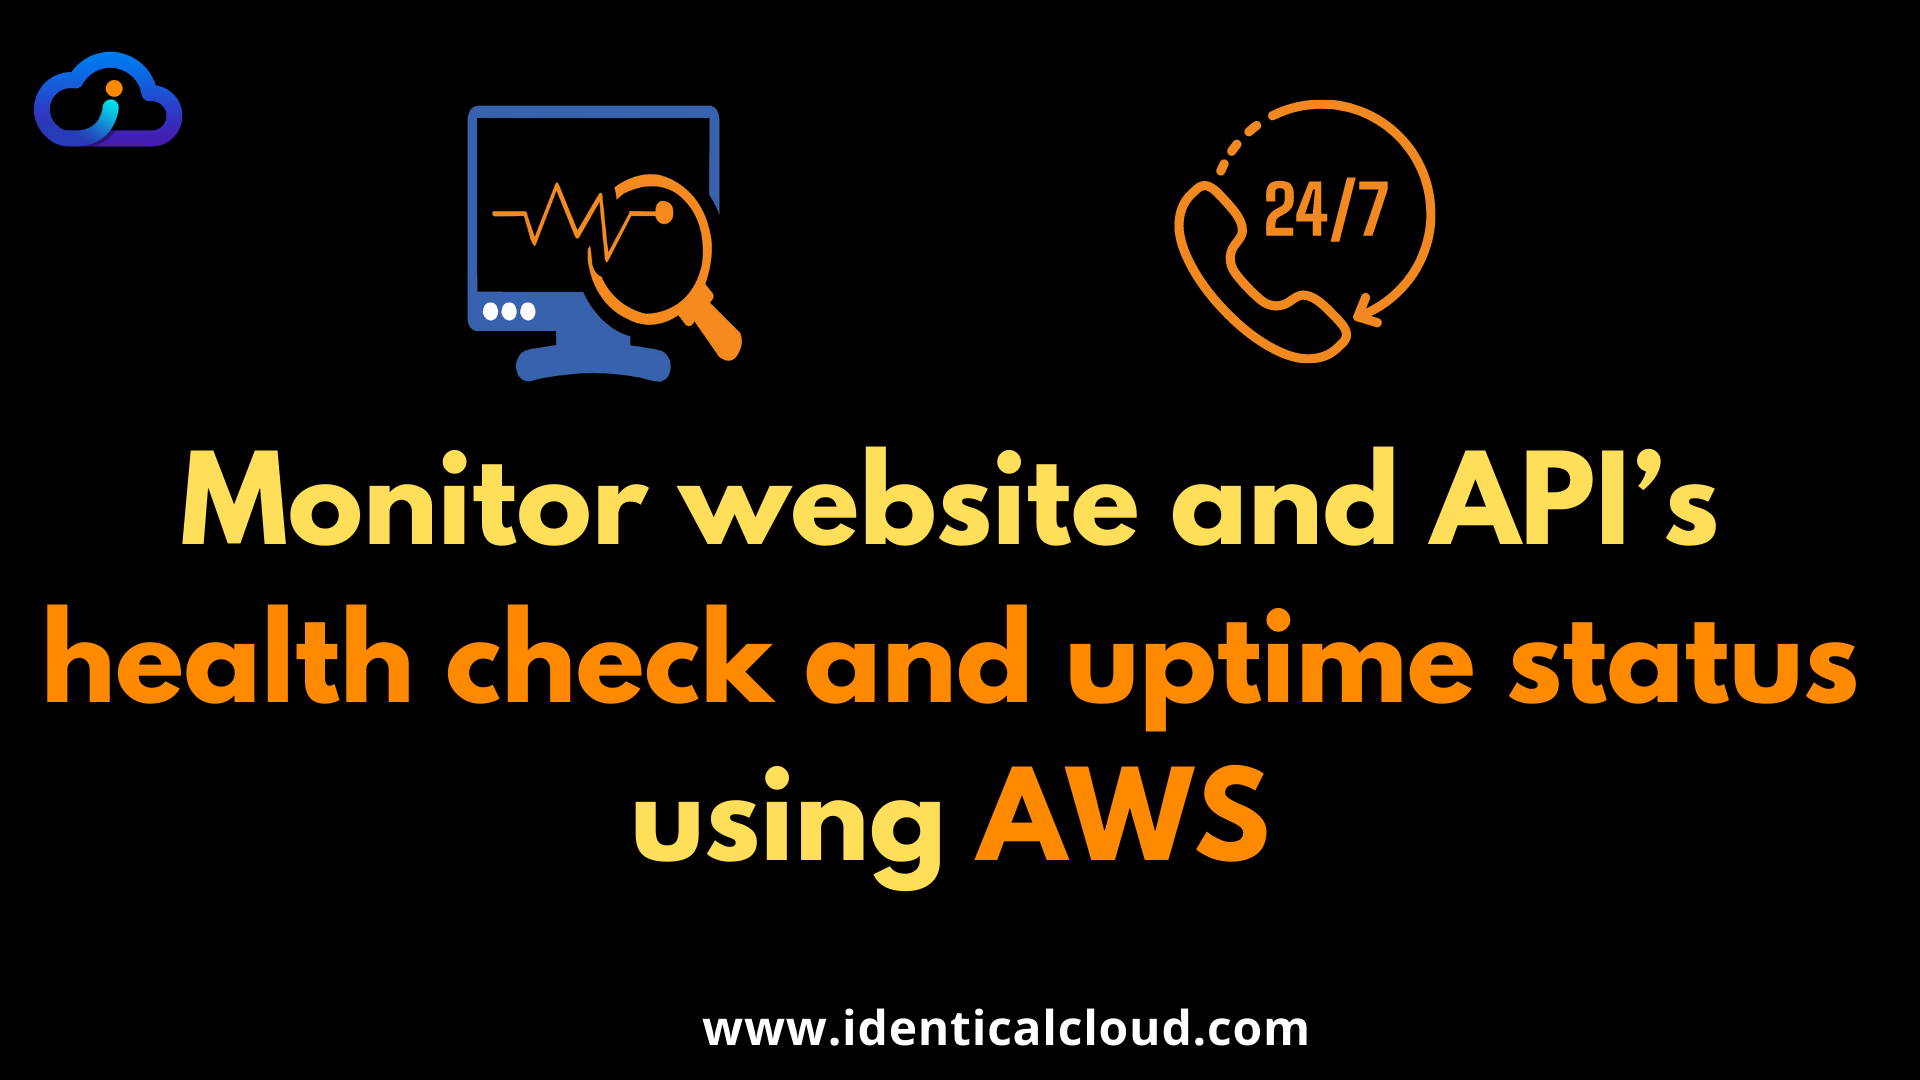 Monitor website and API's health check and uptime status using AWS Synthetic